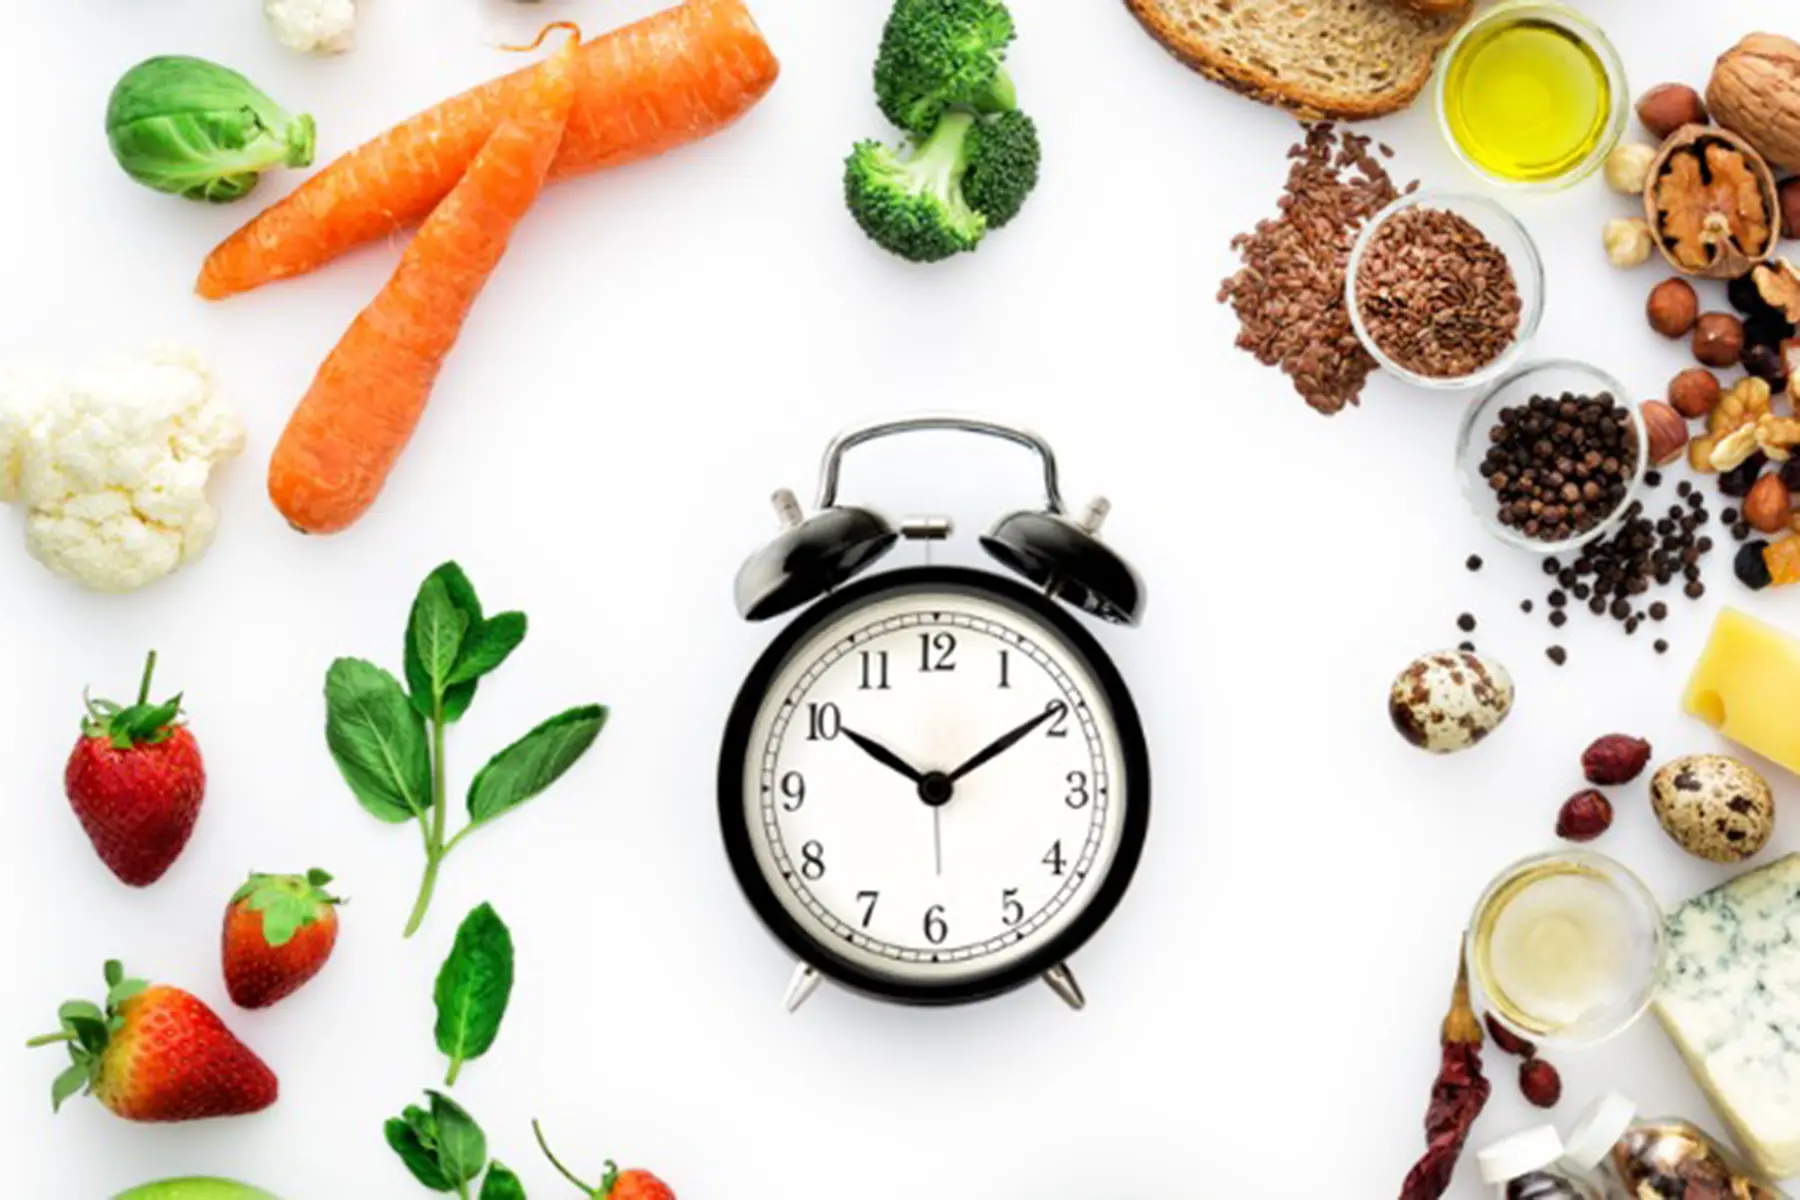 A clock surrounded by an assortment of foods.